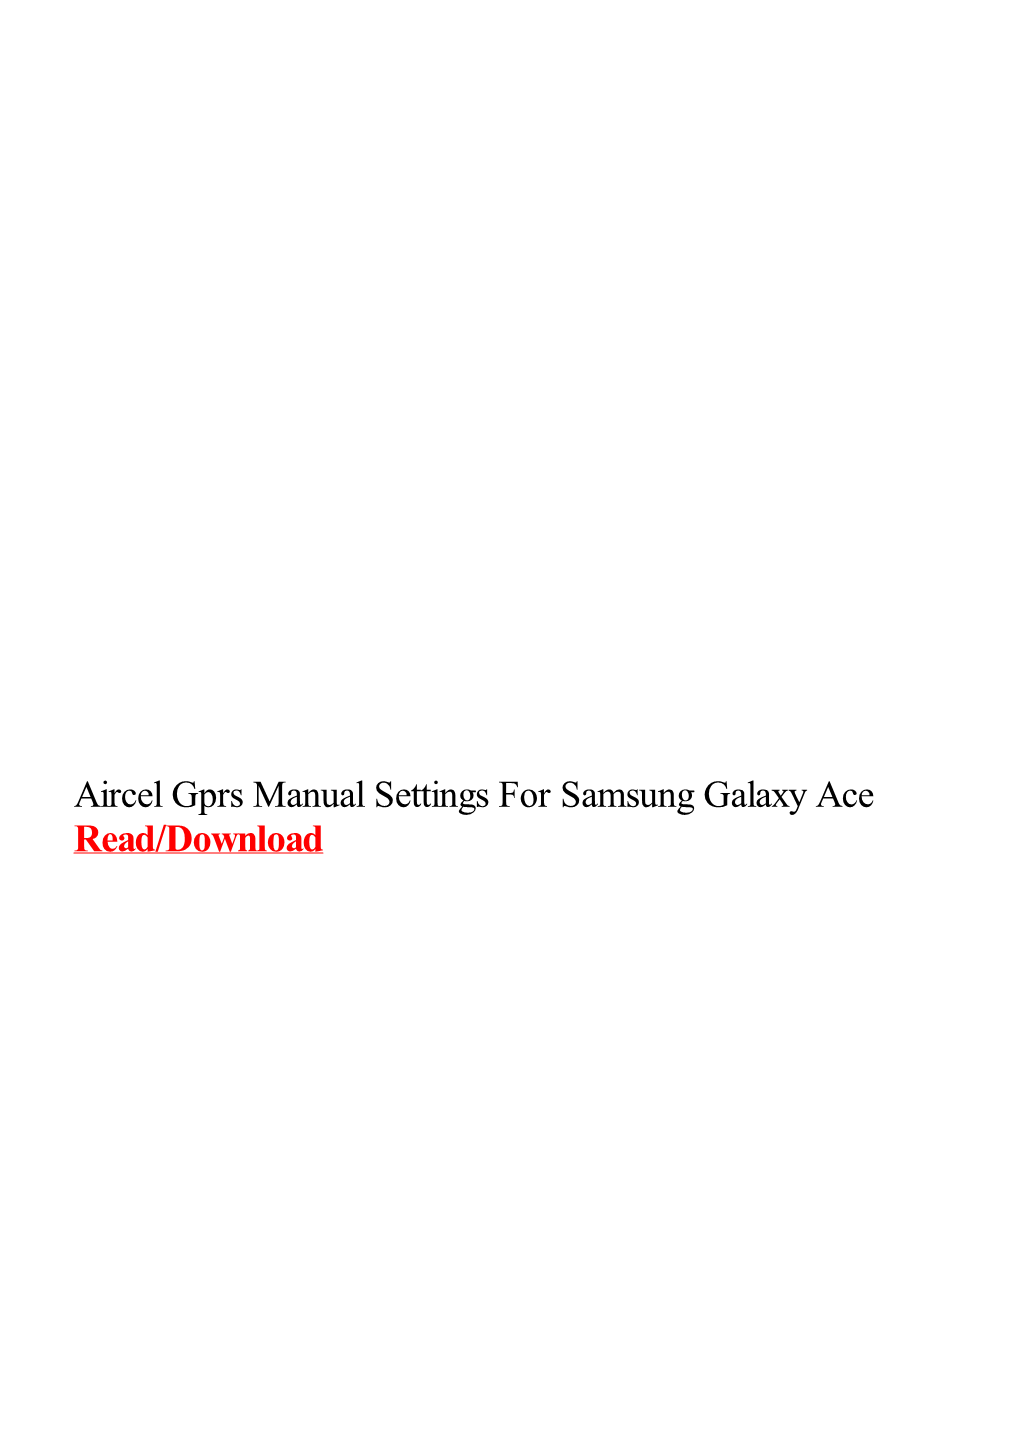 Aircel Gprs Manual Settings for Samsung Galaxy Ace